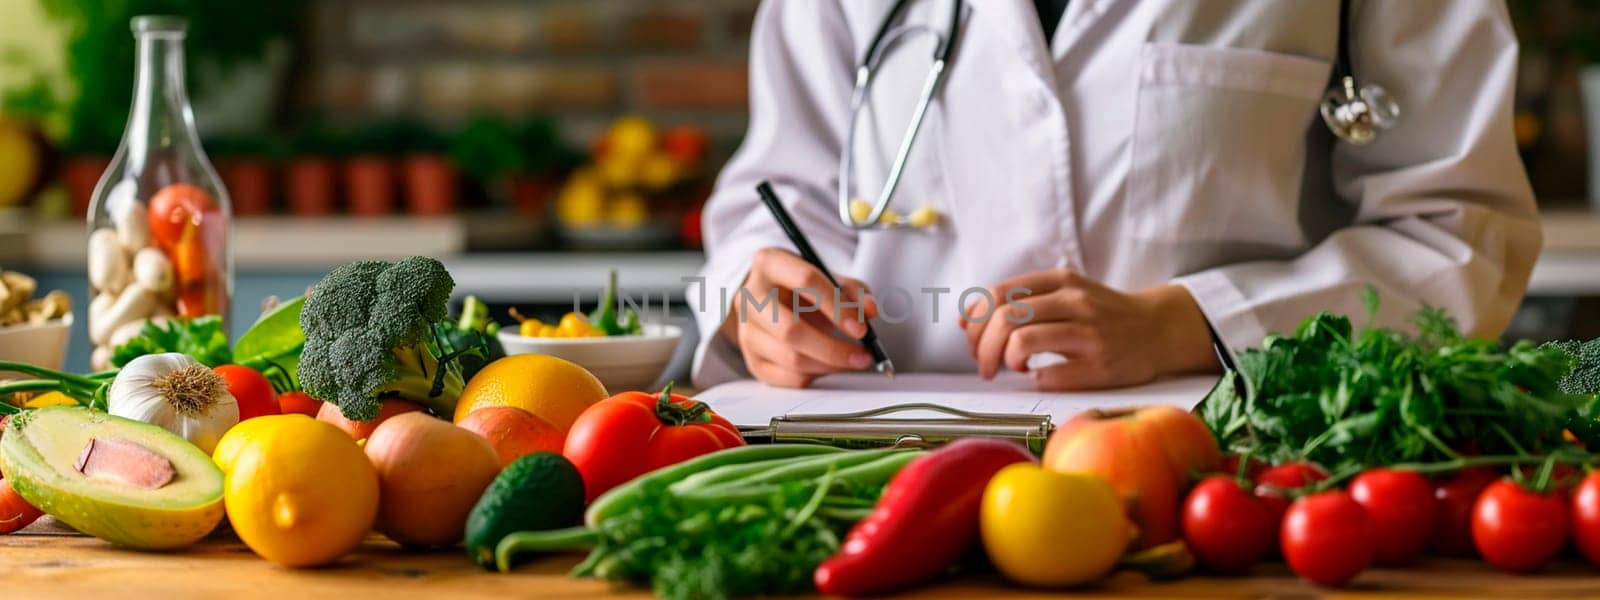 Nutritionist on a background of vegetables. Selective focus. Food.